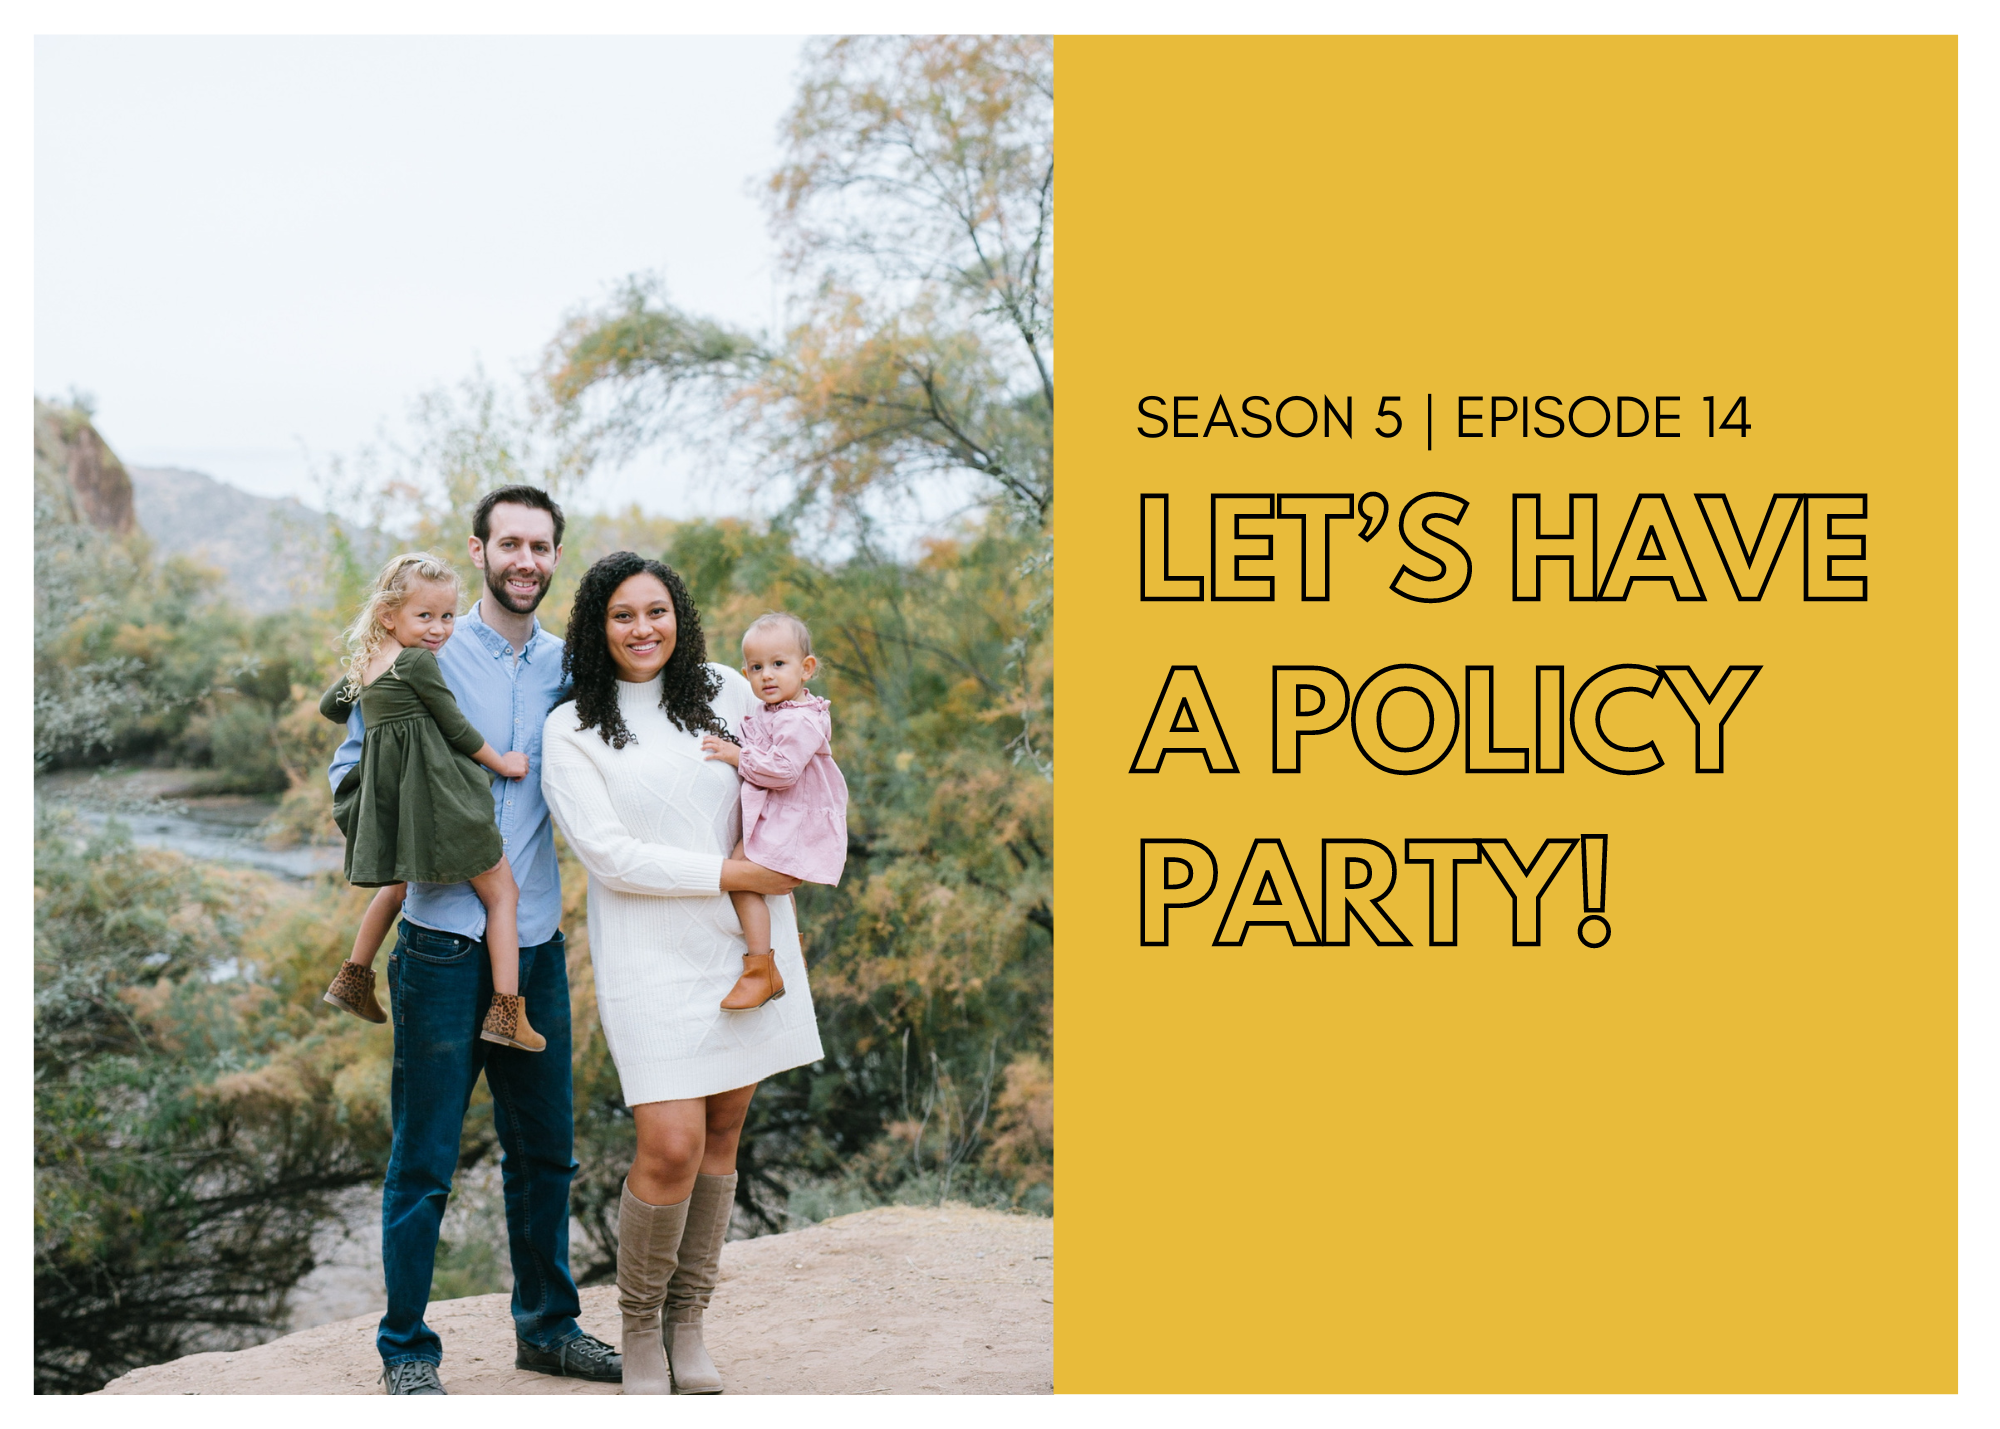 Let’s Have a Policy Party!